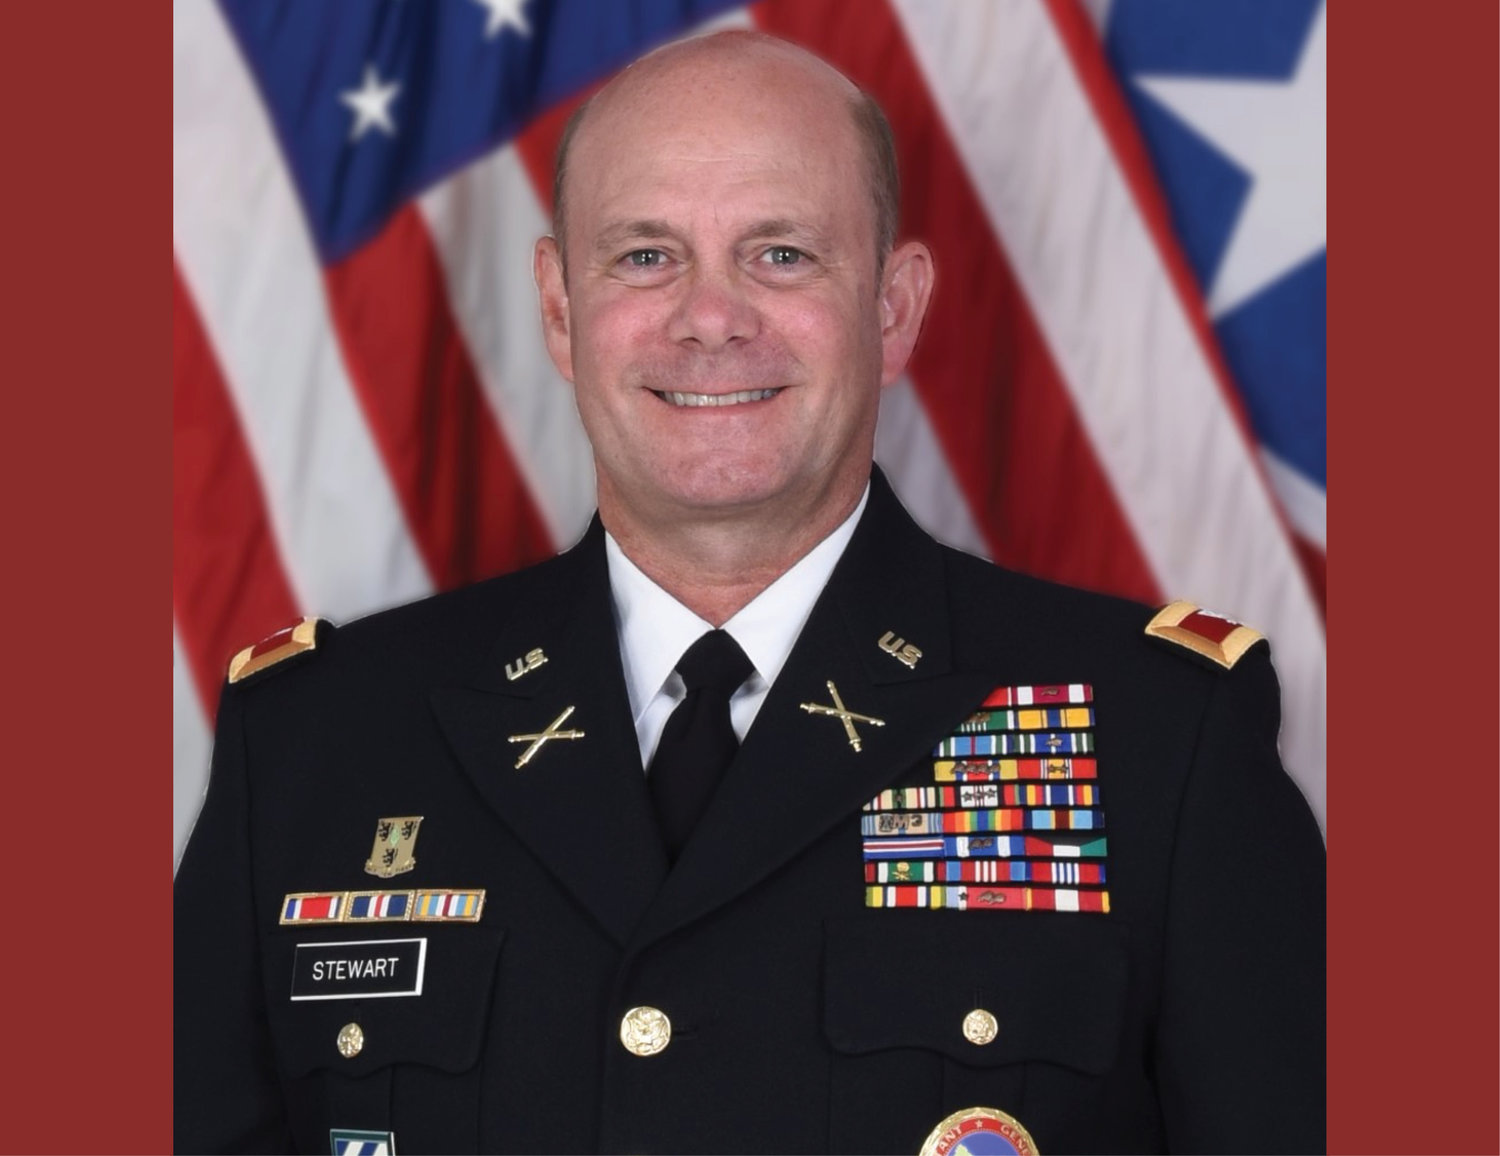 Retired U.S. Army Col. Kevin Stewart has been appointed new commander of the Tennessee State Guard.